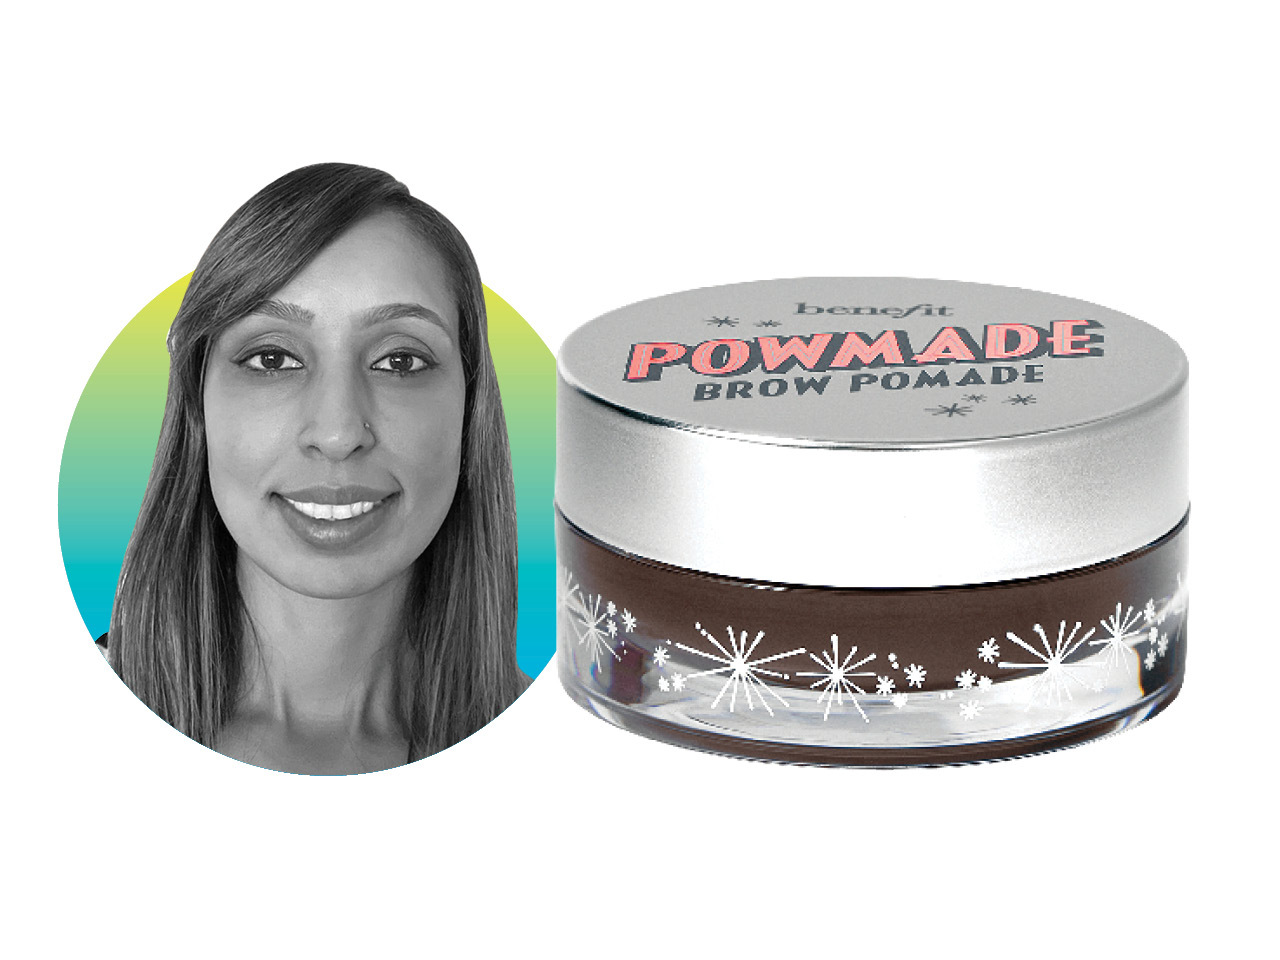 A Chatelaine reader reviews Benefit Cosmetics Brow Pomade.